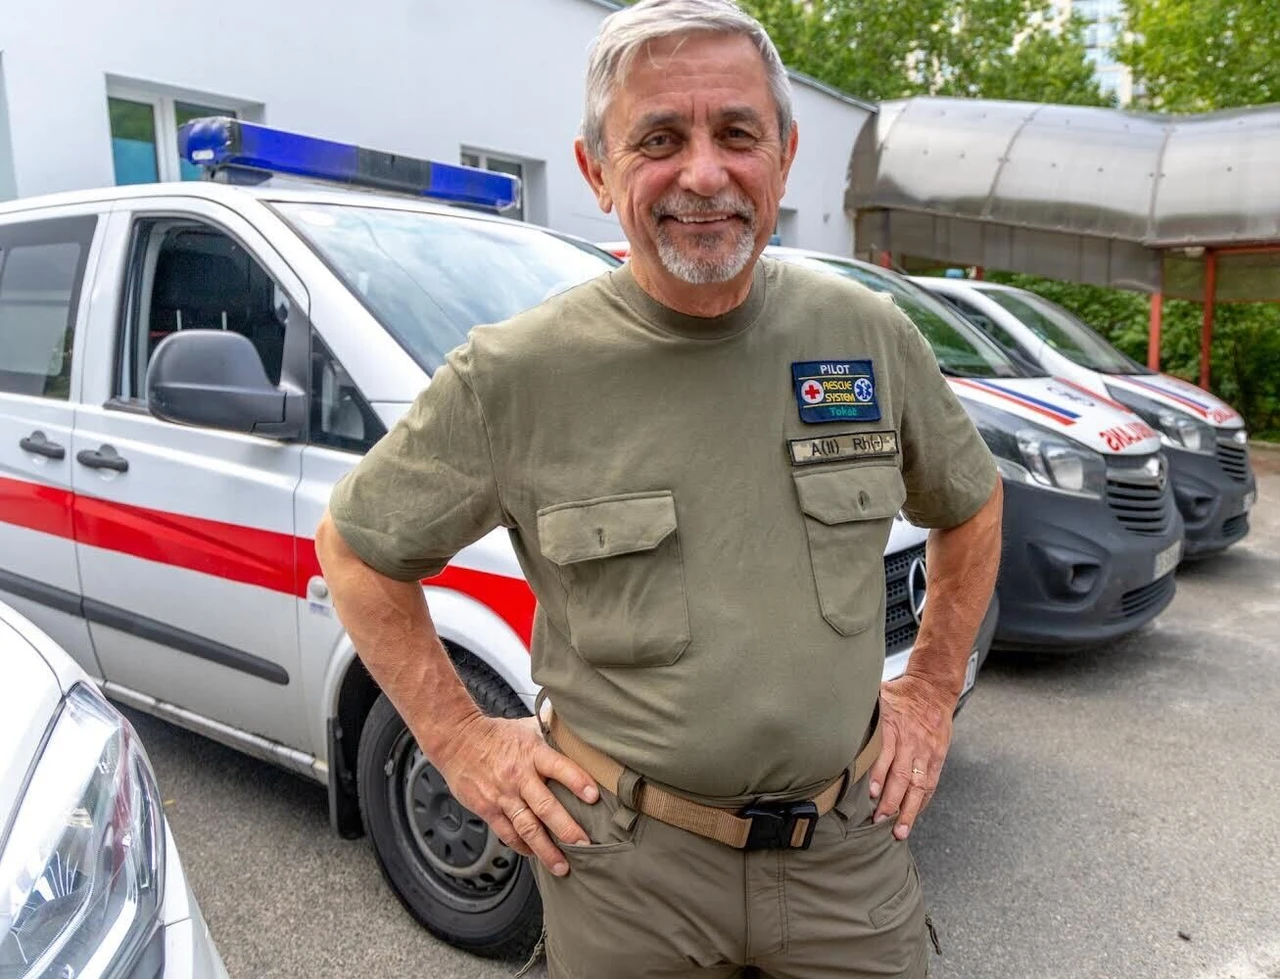 Aiding Wounded Soldiers: Entrepreneur and Rotary International Provide 35 Ambulances to Ukraine